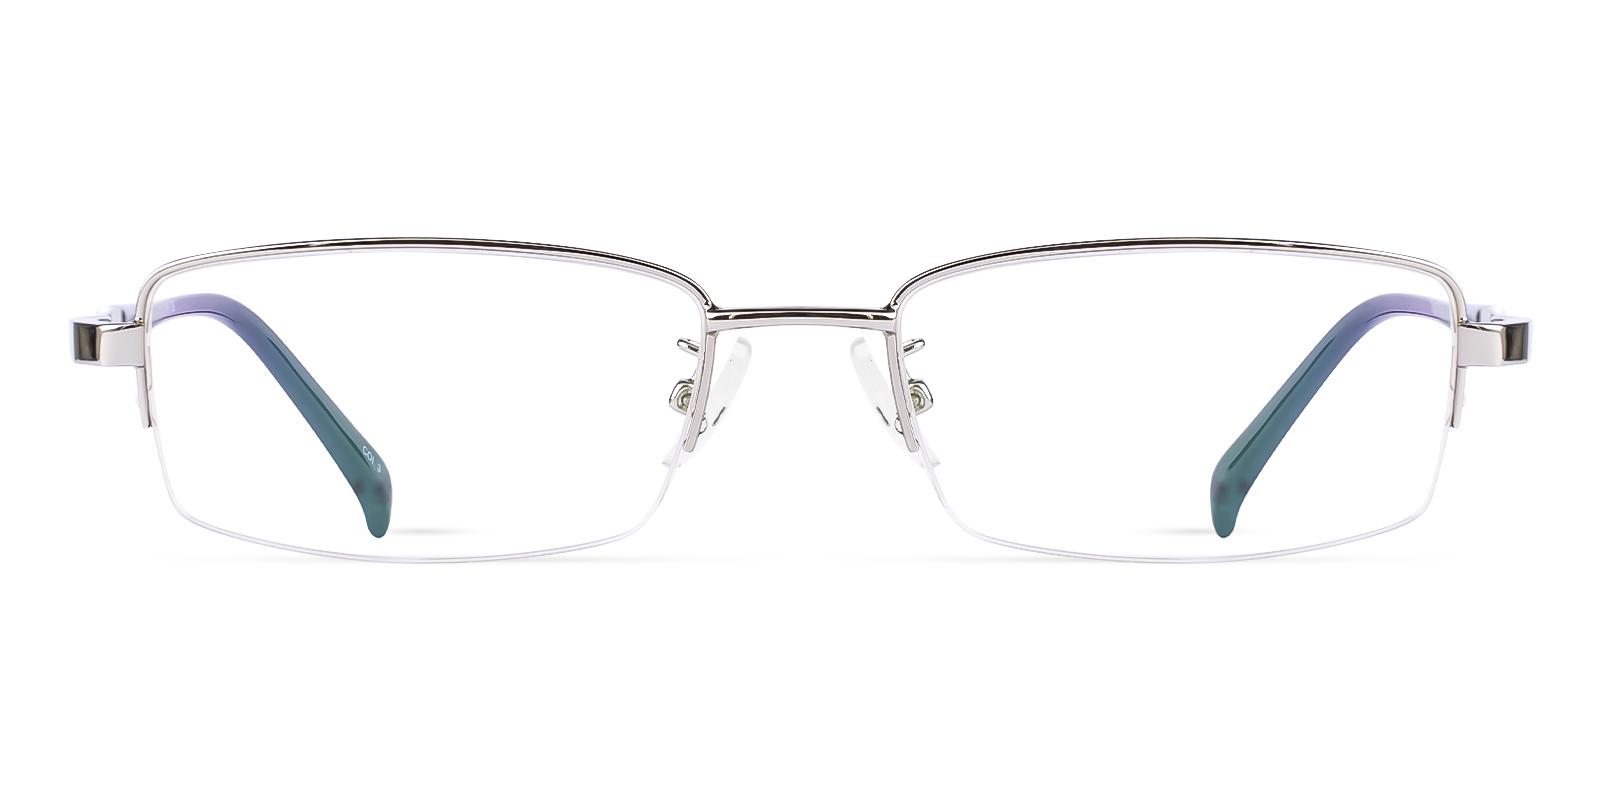 Panio Silver Metal Eyeglasses , SpringHinges , NosePads Frames from ABBE Glasses